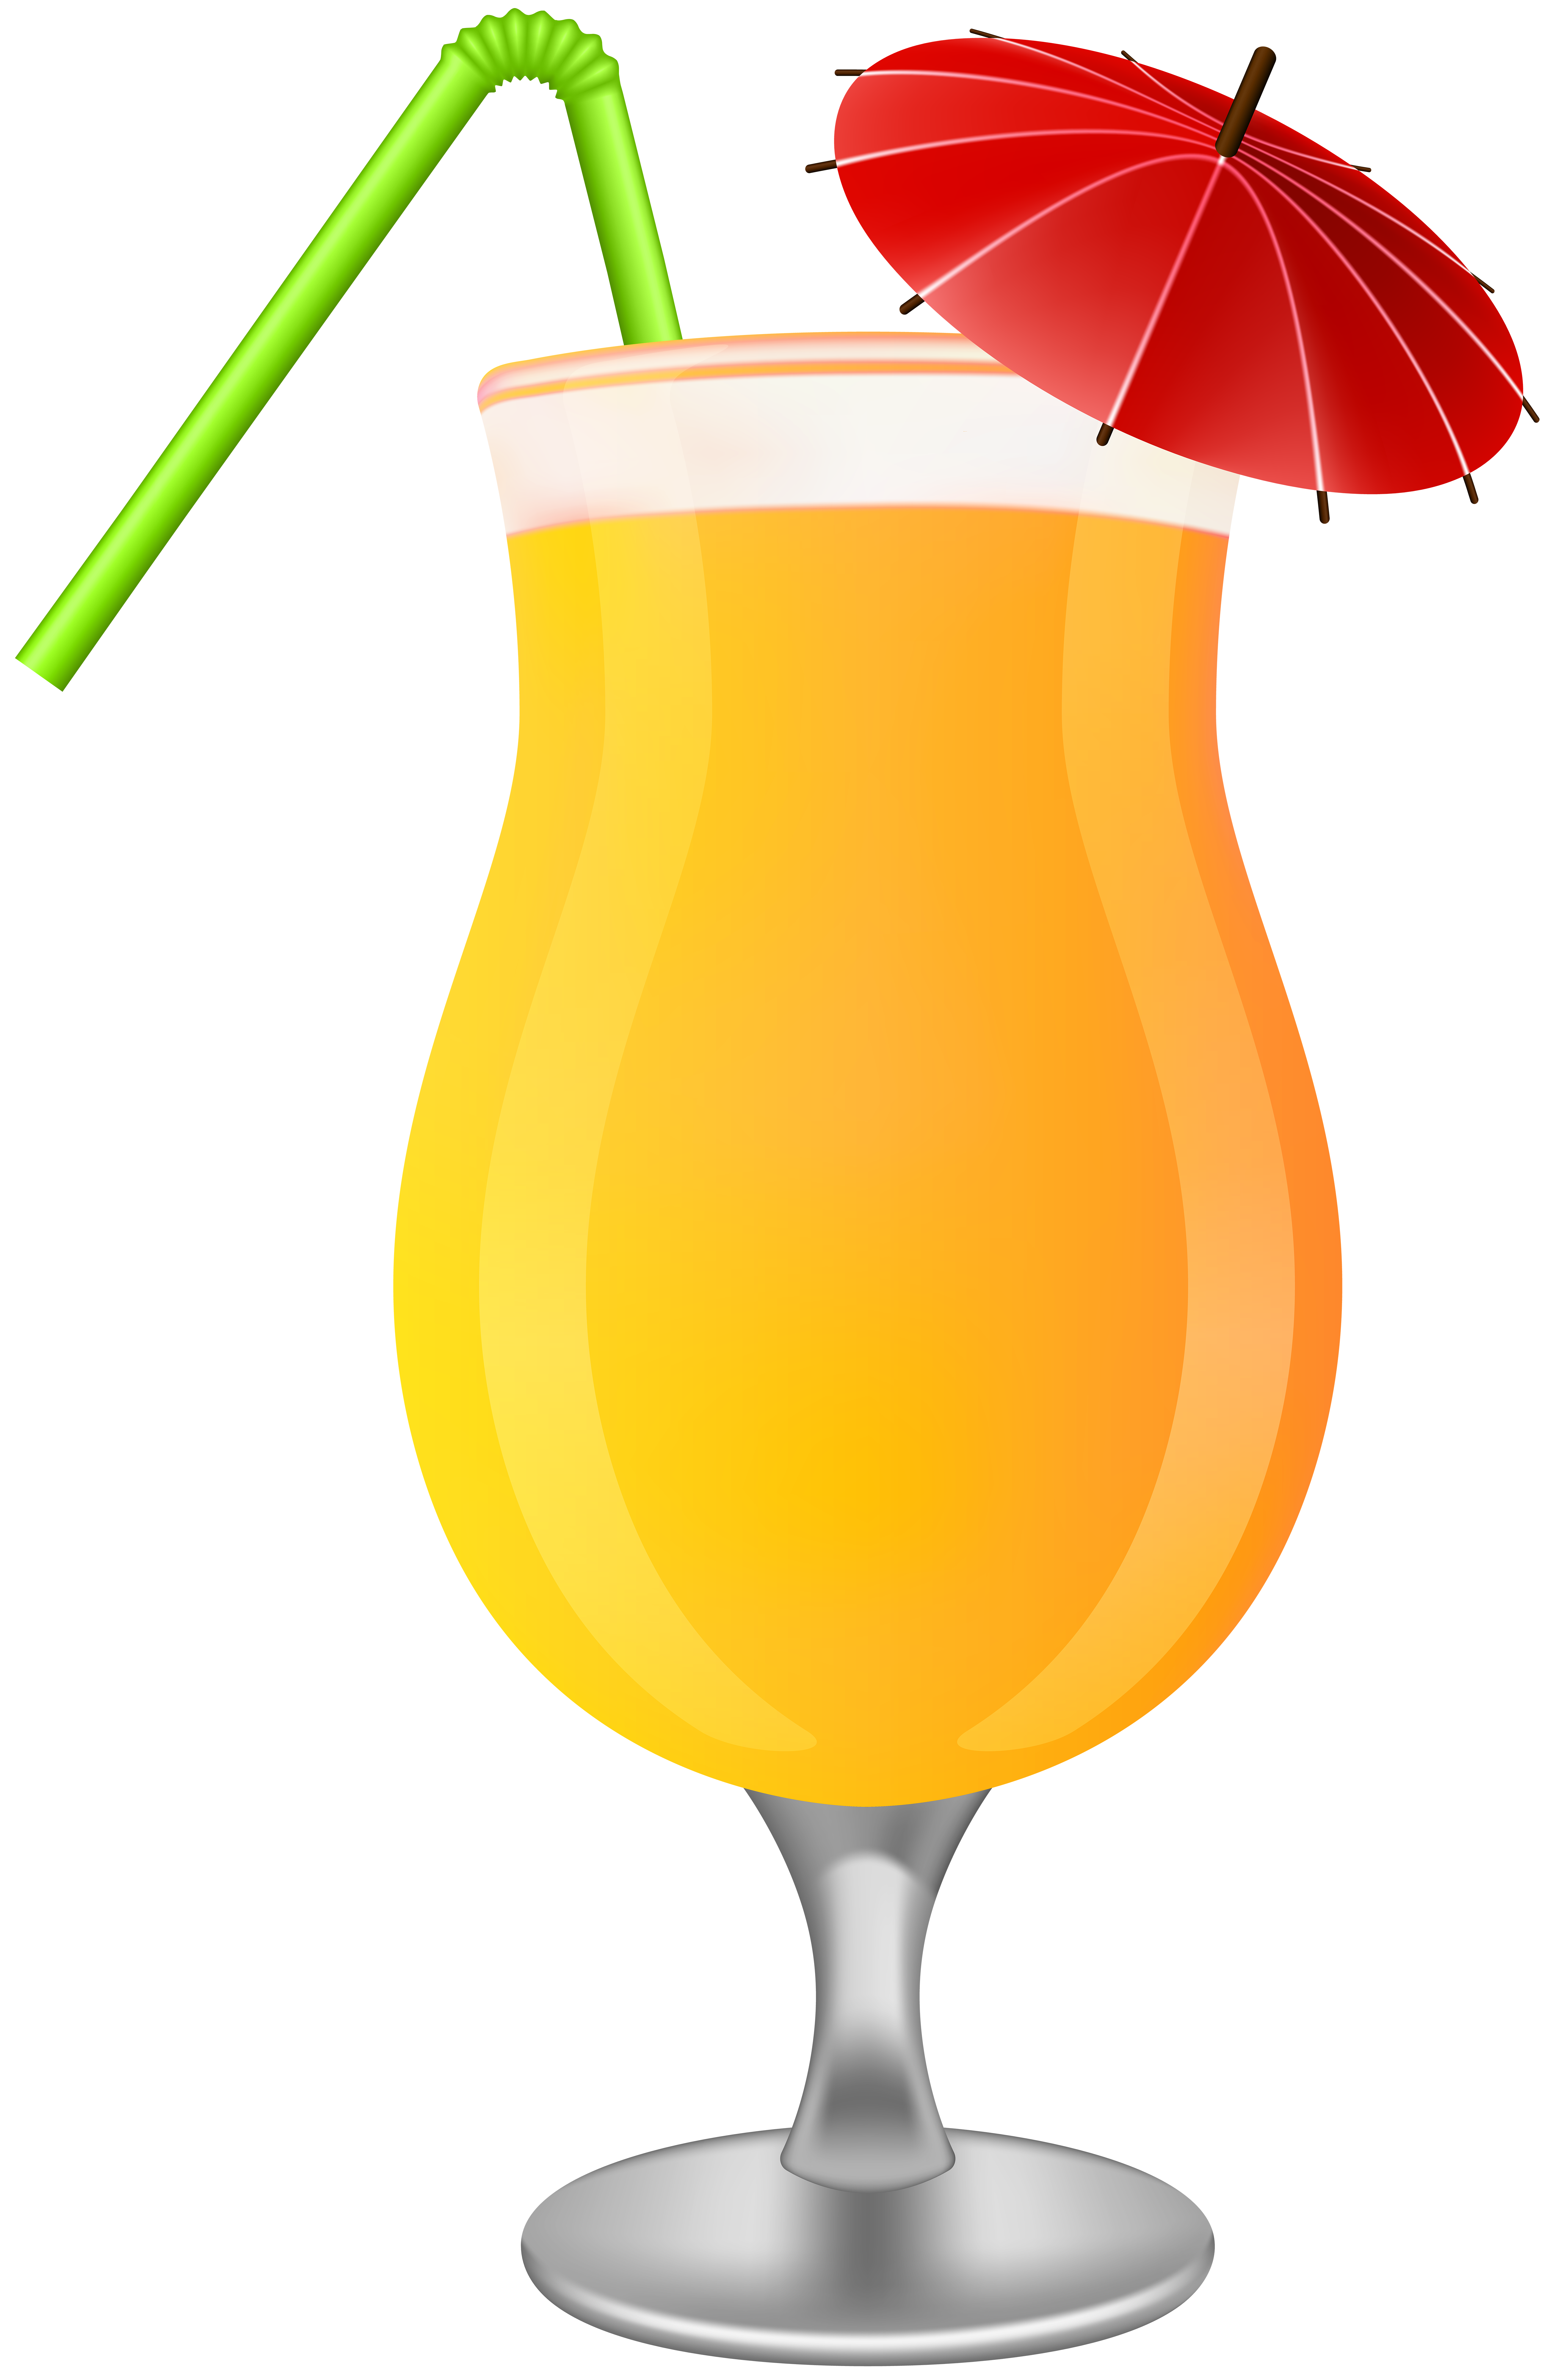 Cocktail Drink Png Clip Art Image Gallery Yopriceville High Quality Images And Transparent Png Free Clipart